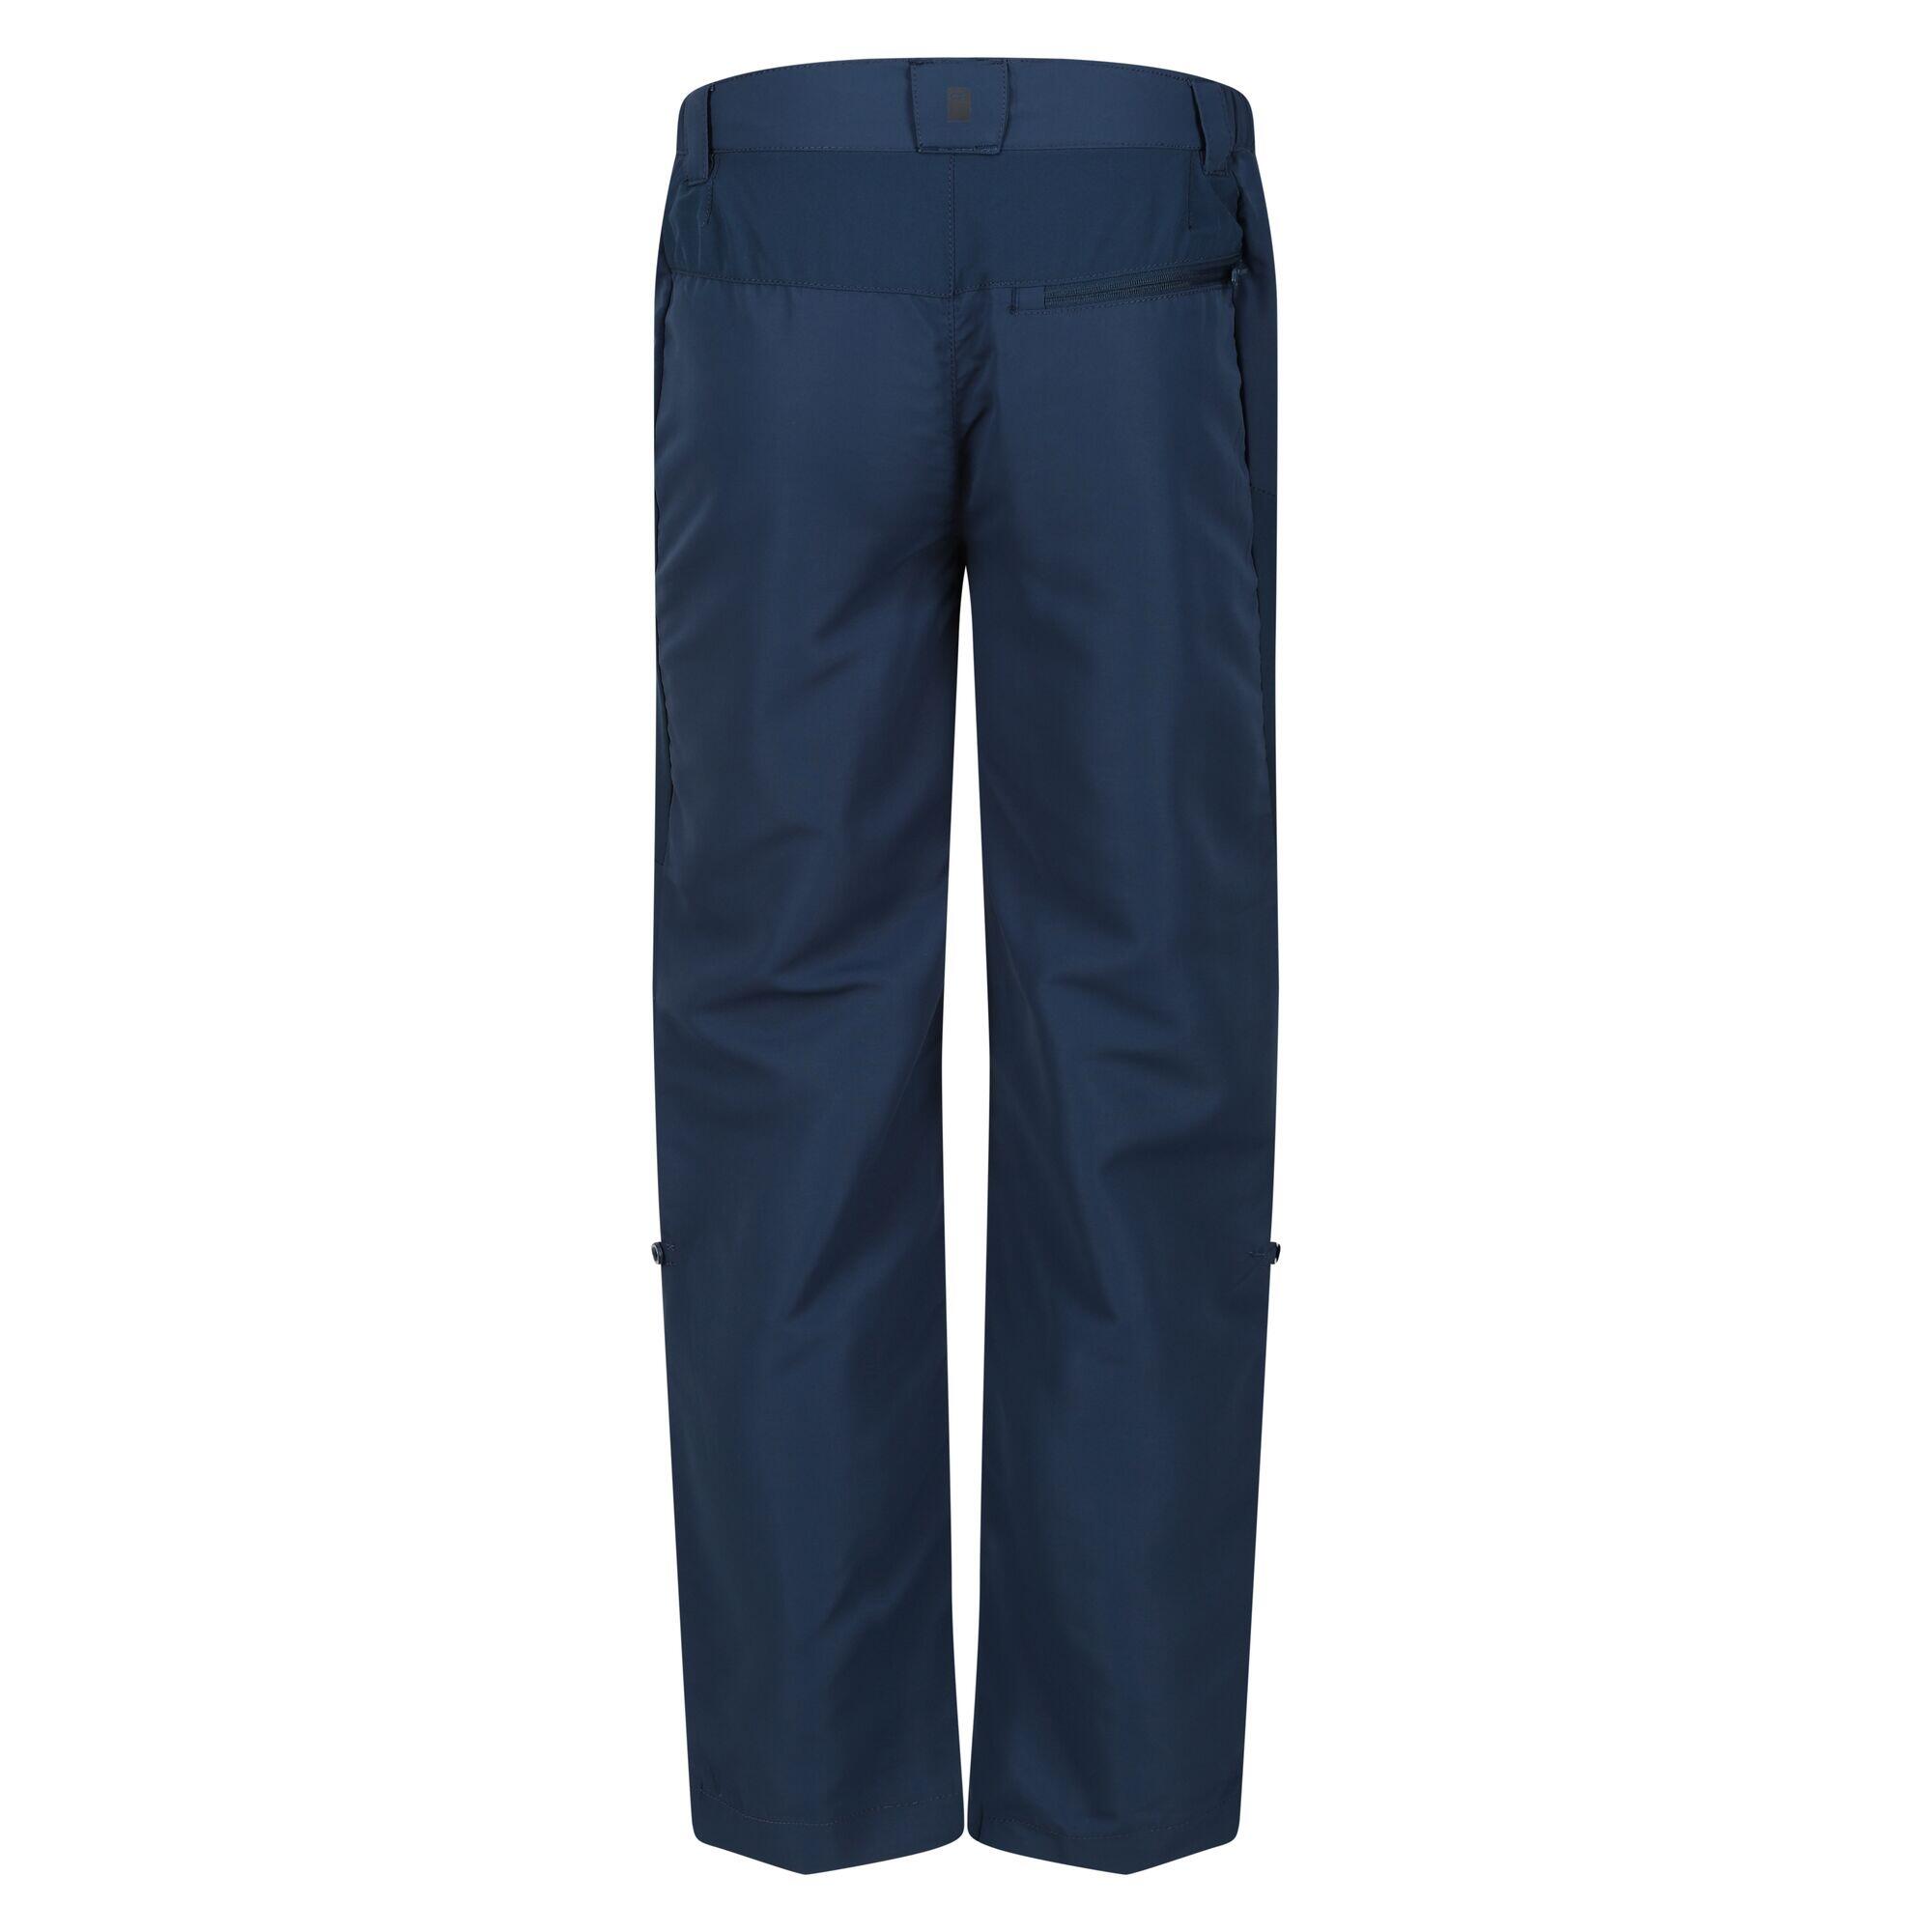 Childrens/Kids Sorcer VI Hiking Trousers (Blue Wing) 2/5